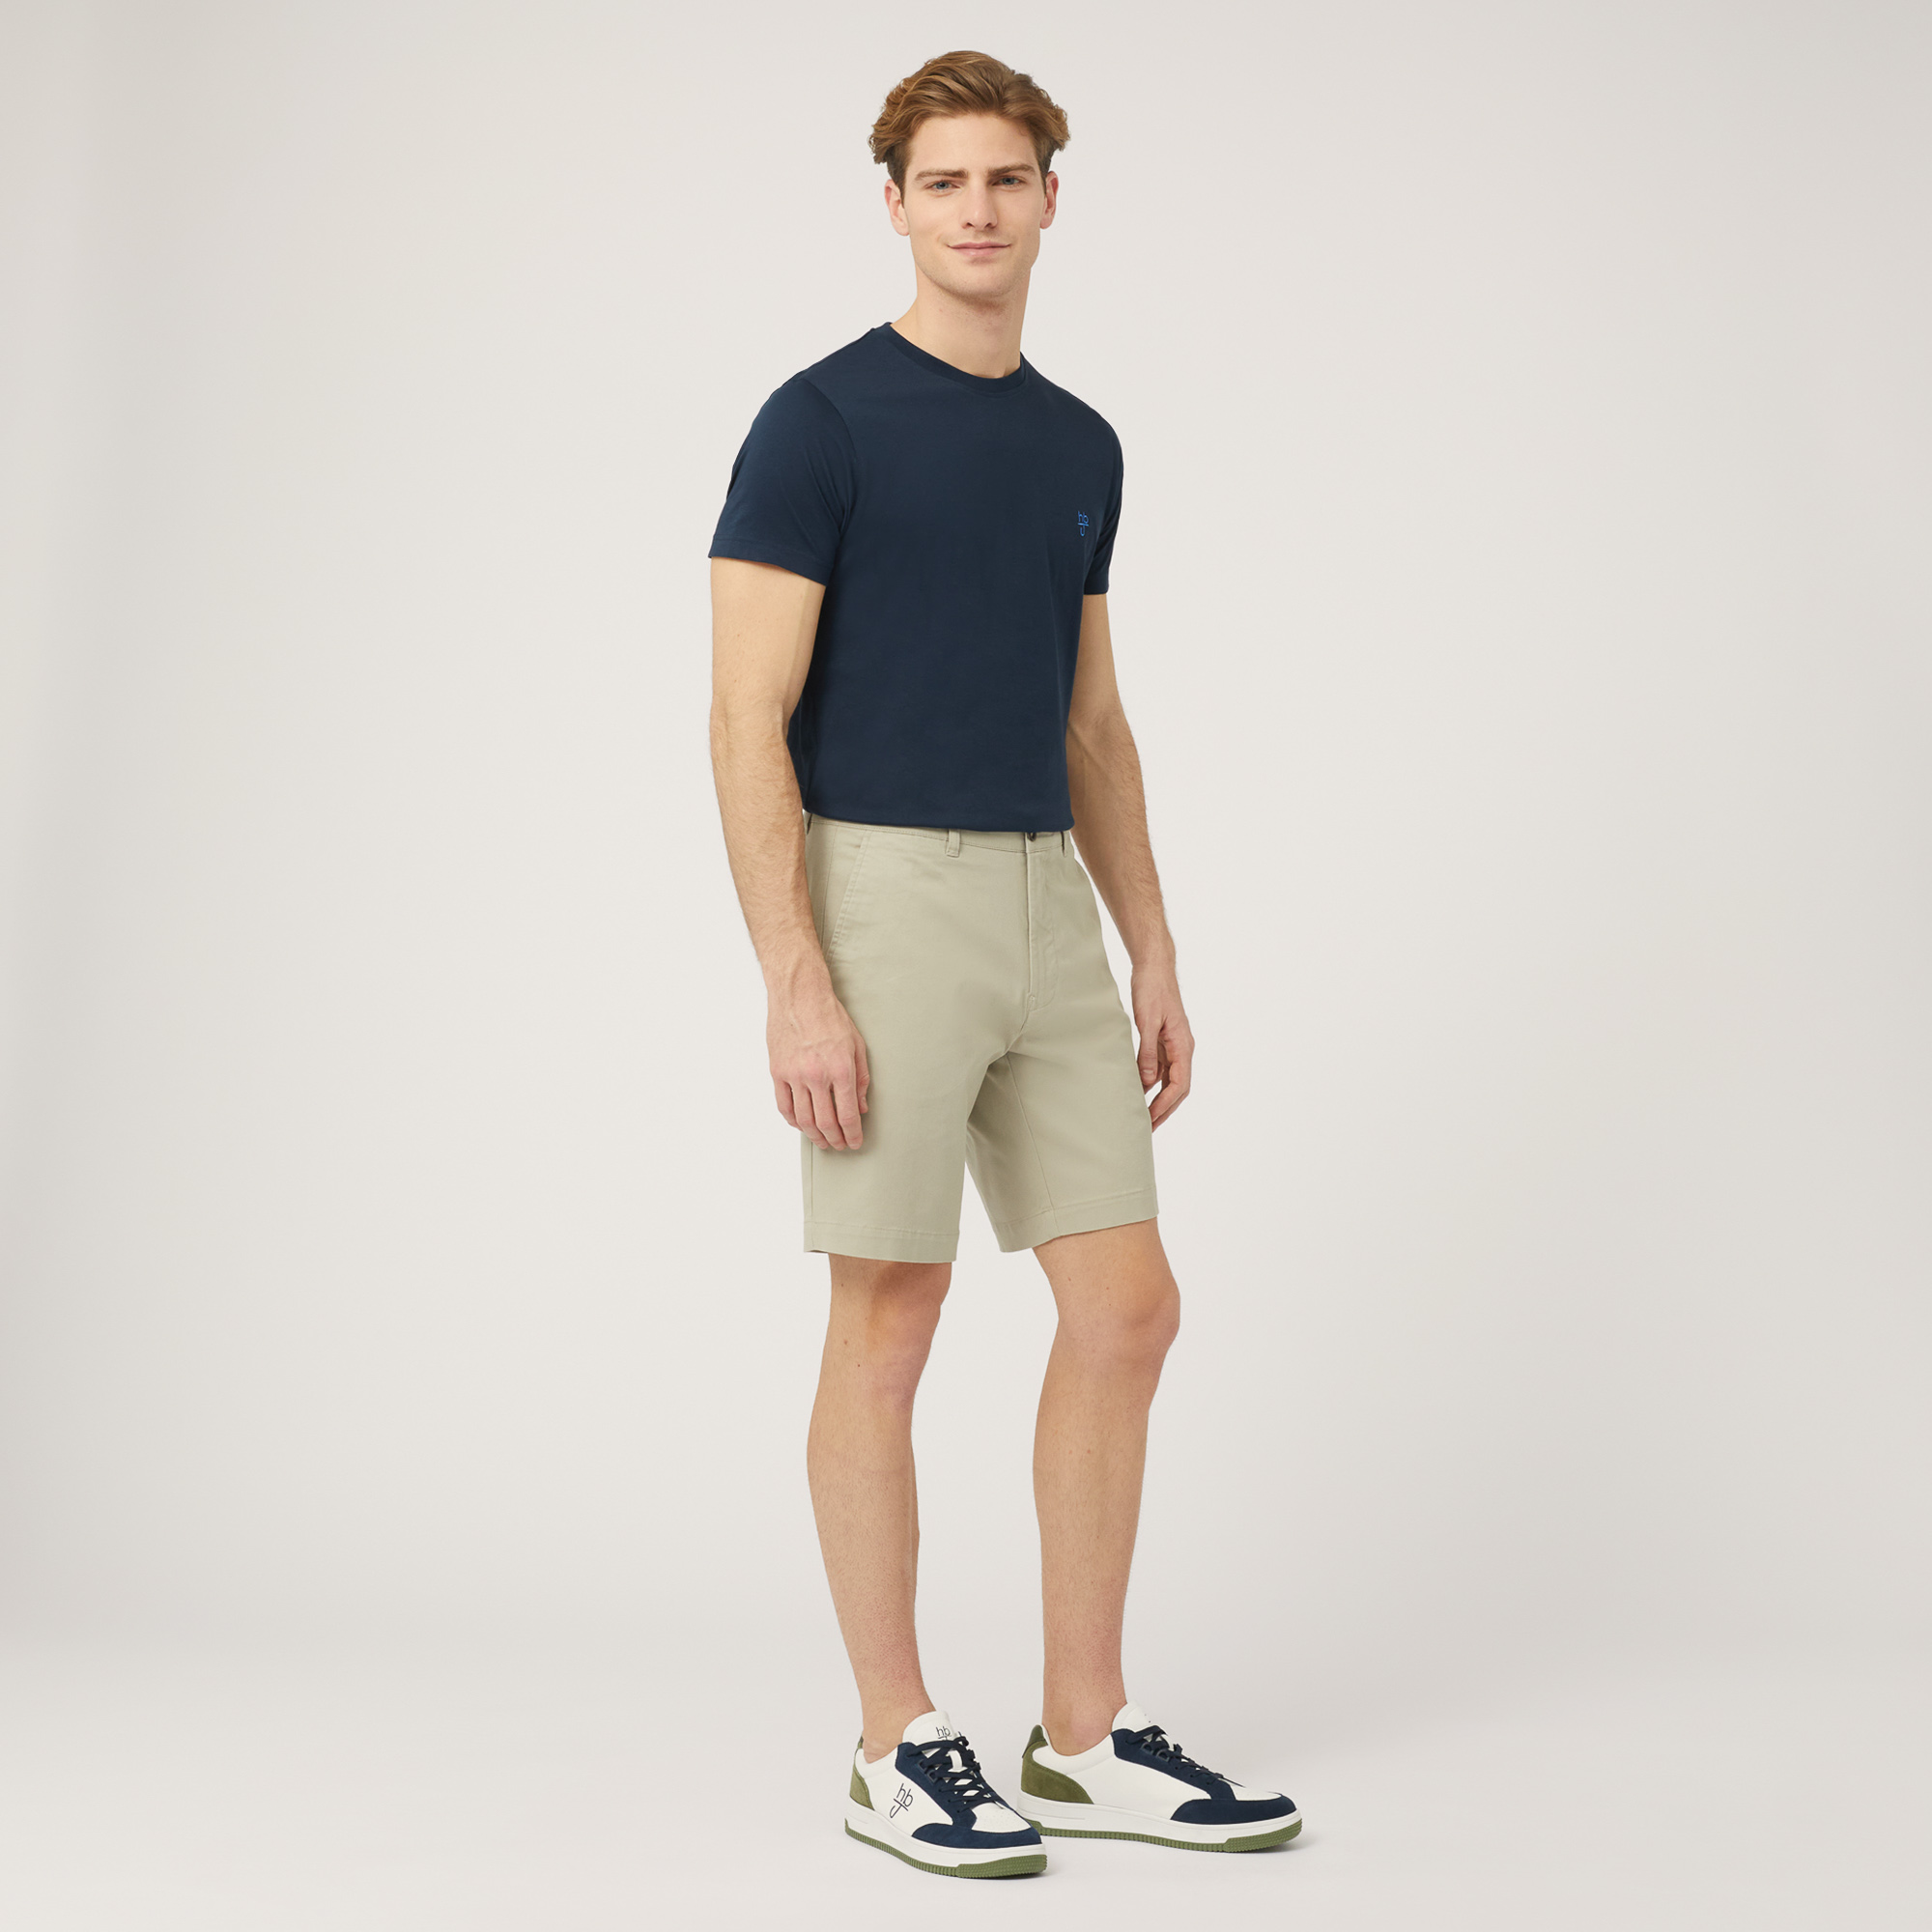 Bermuda Chino In Twill, Beige, large image number 3